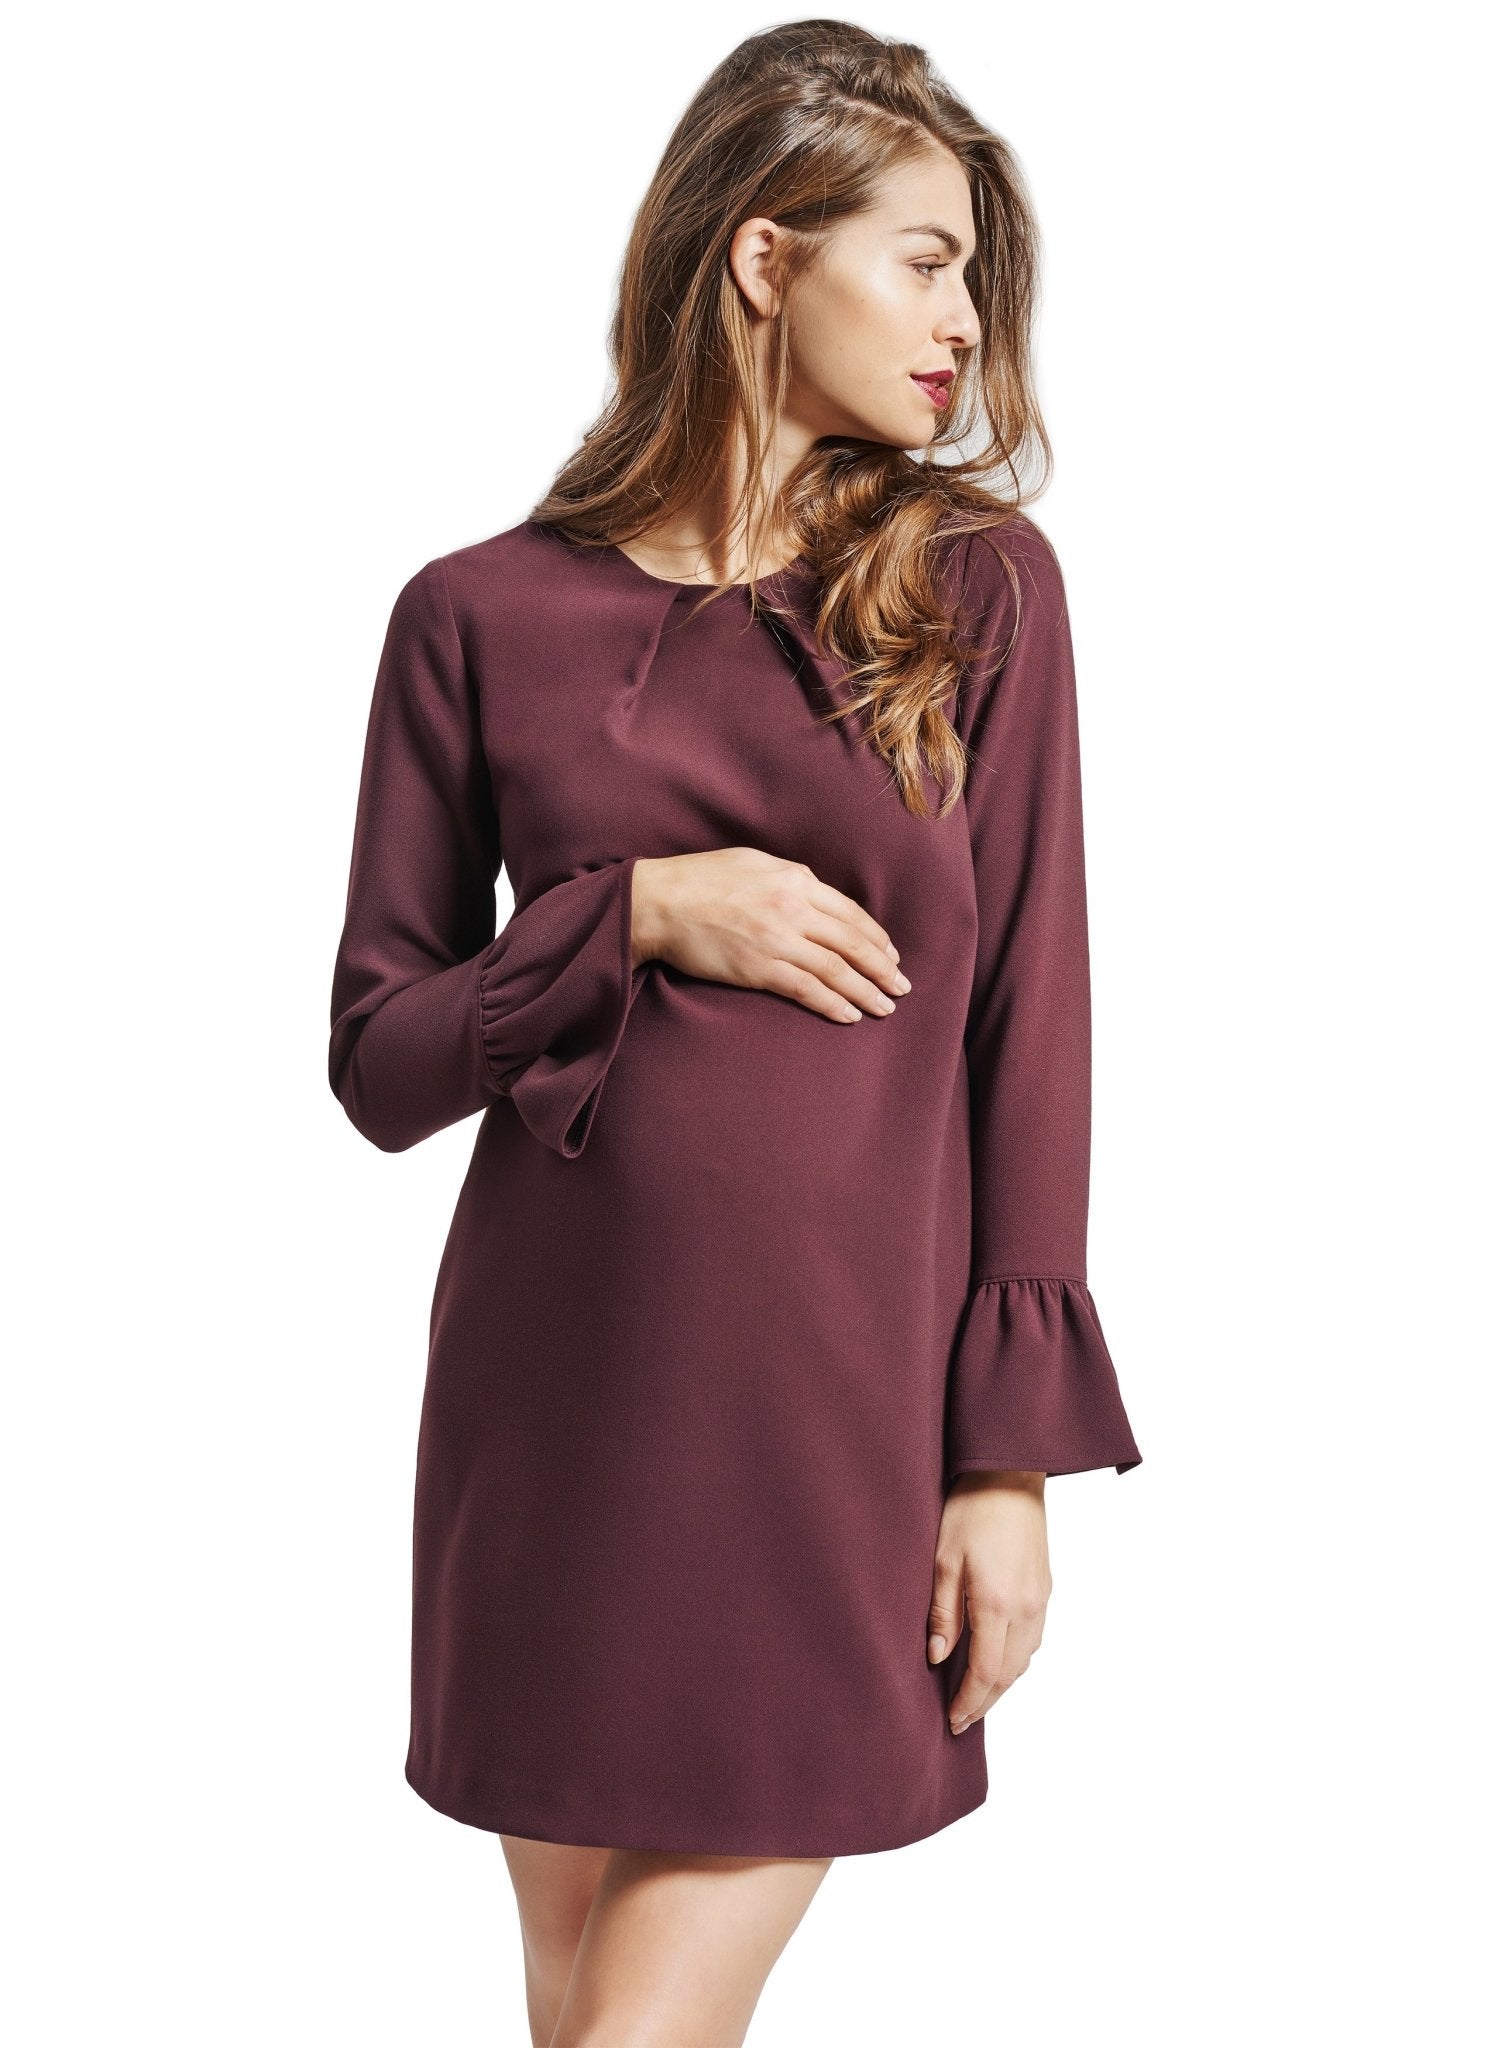 Lilly Maternity Dress - Aubergine - Mums and Bumps